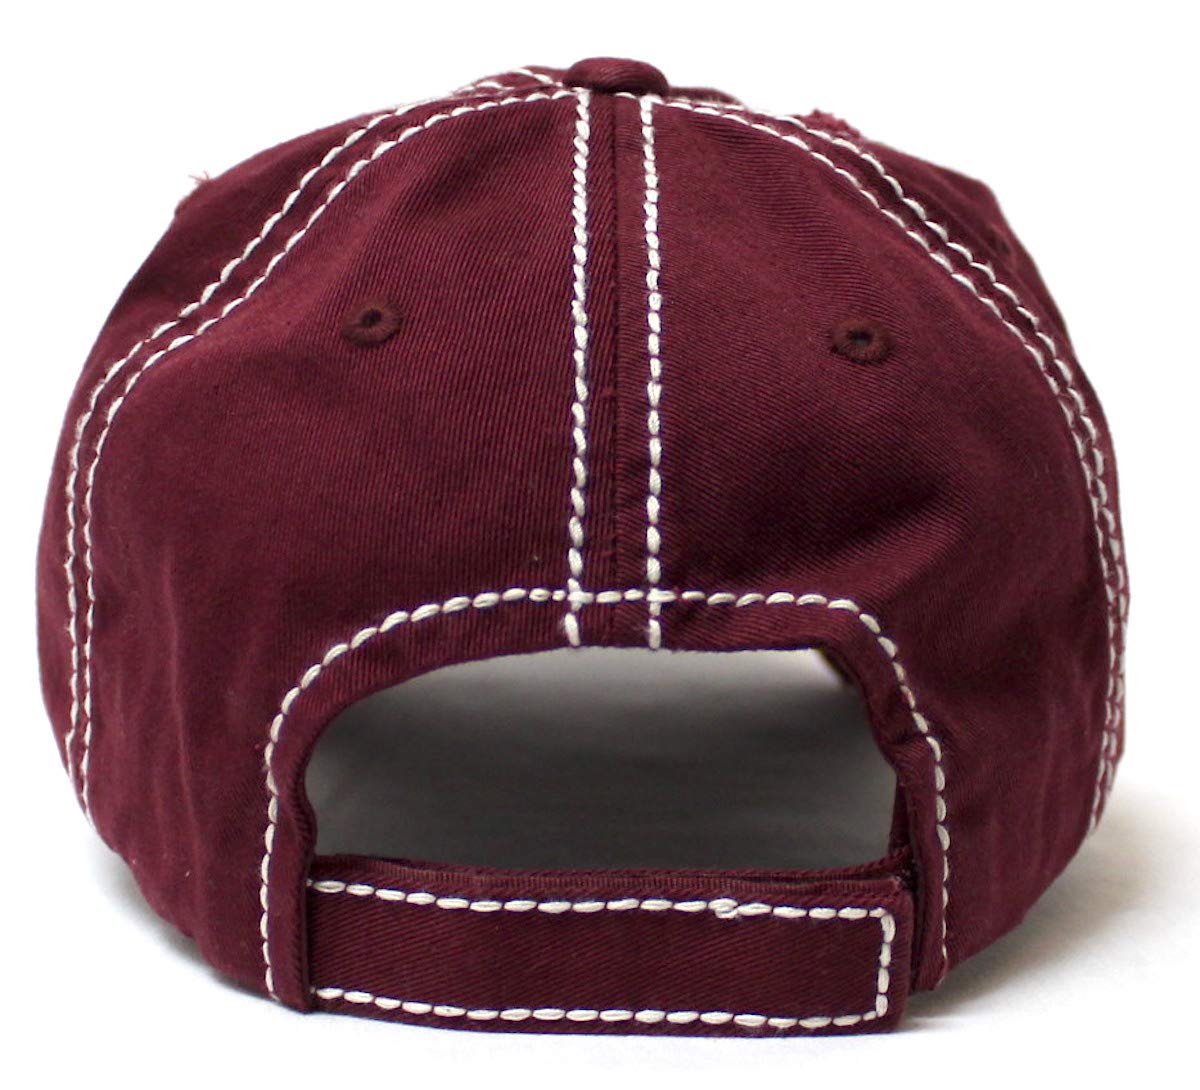 Women's Ballcap Need More Wine for The Love of Vino Patch Embroidery Hat, Burgundy